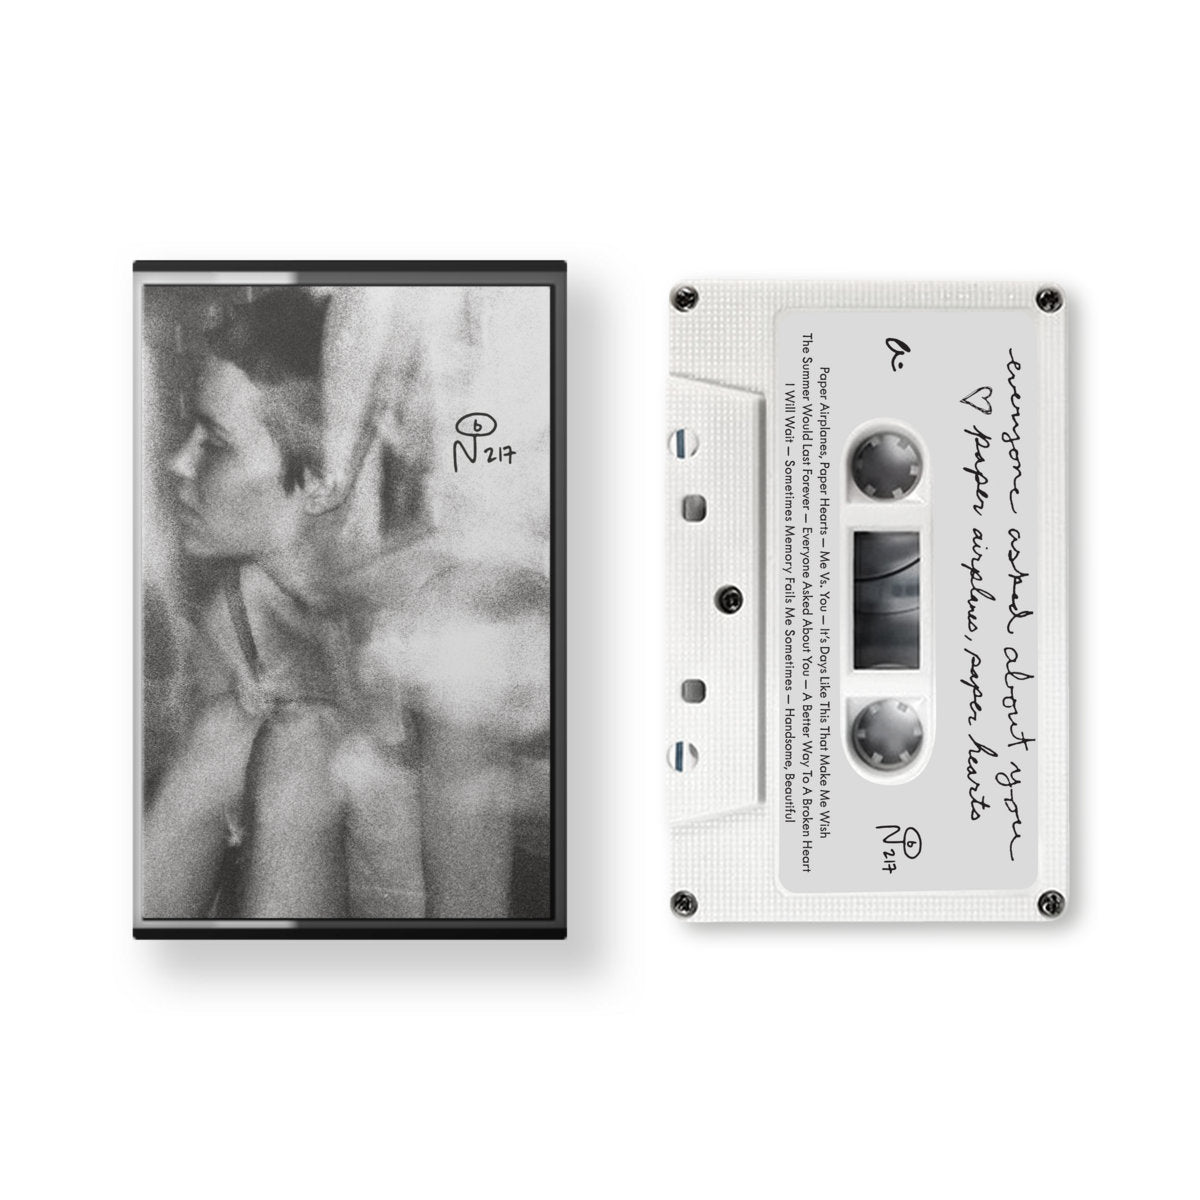 EVERYONE ASKED ABOUT YOU - PAPER AIRPLANES, PAPER HEARTS Cassette Tape